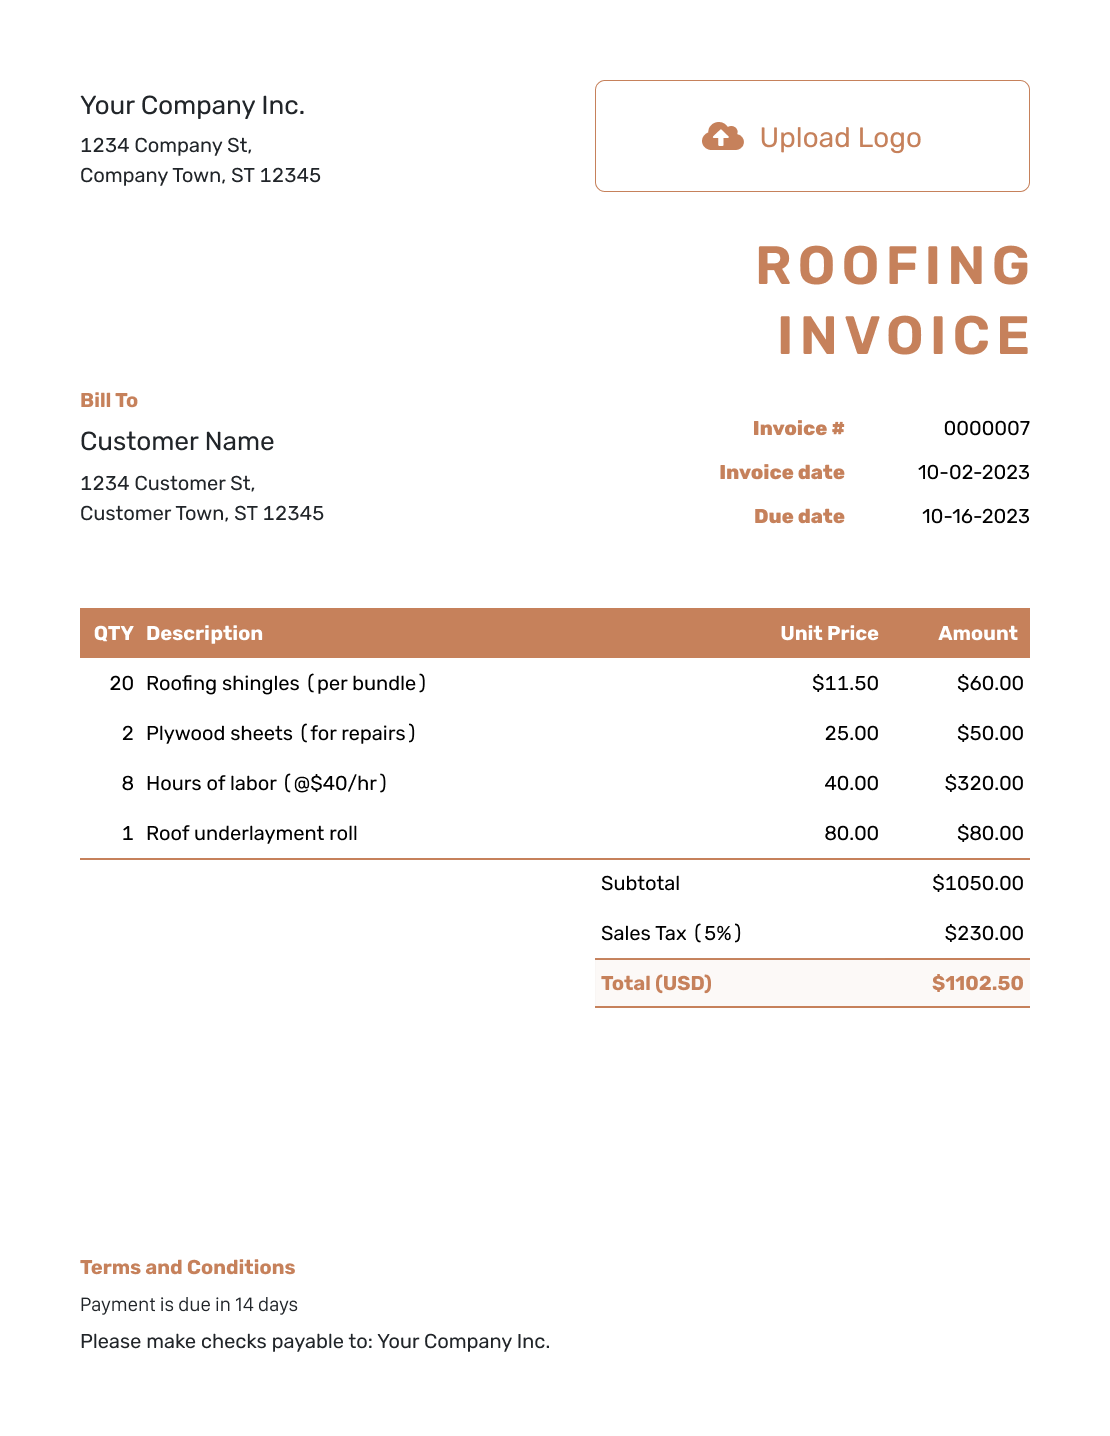 Standard Roofing Invoice Template